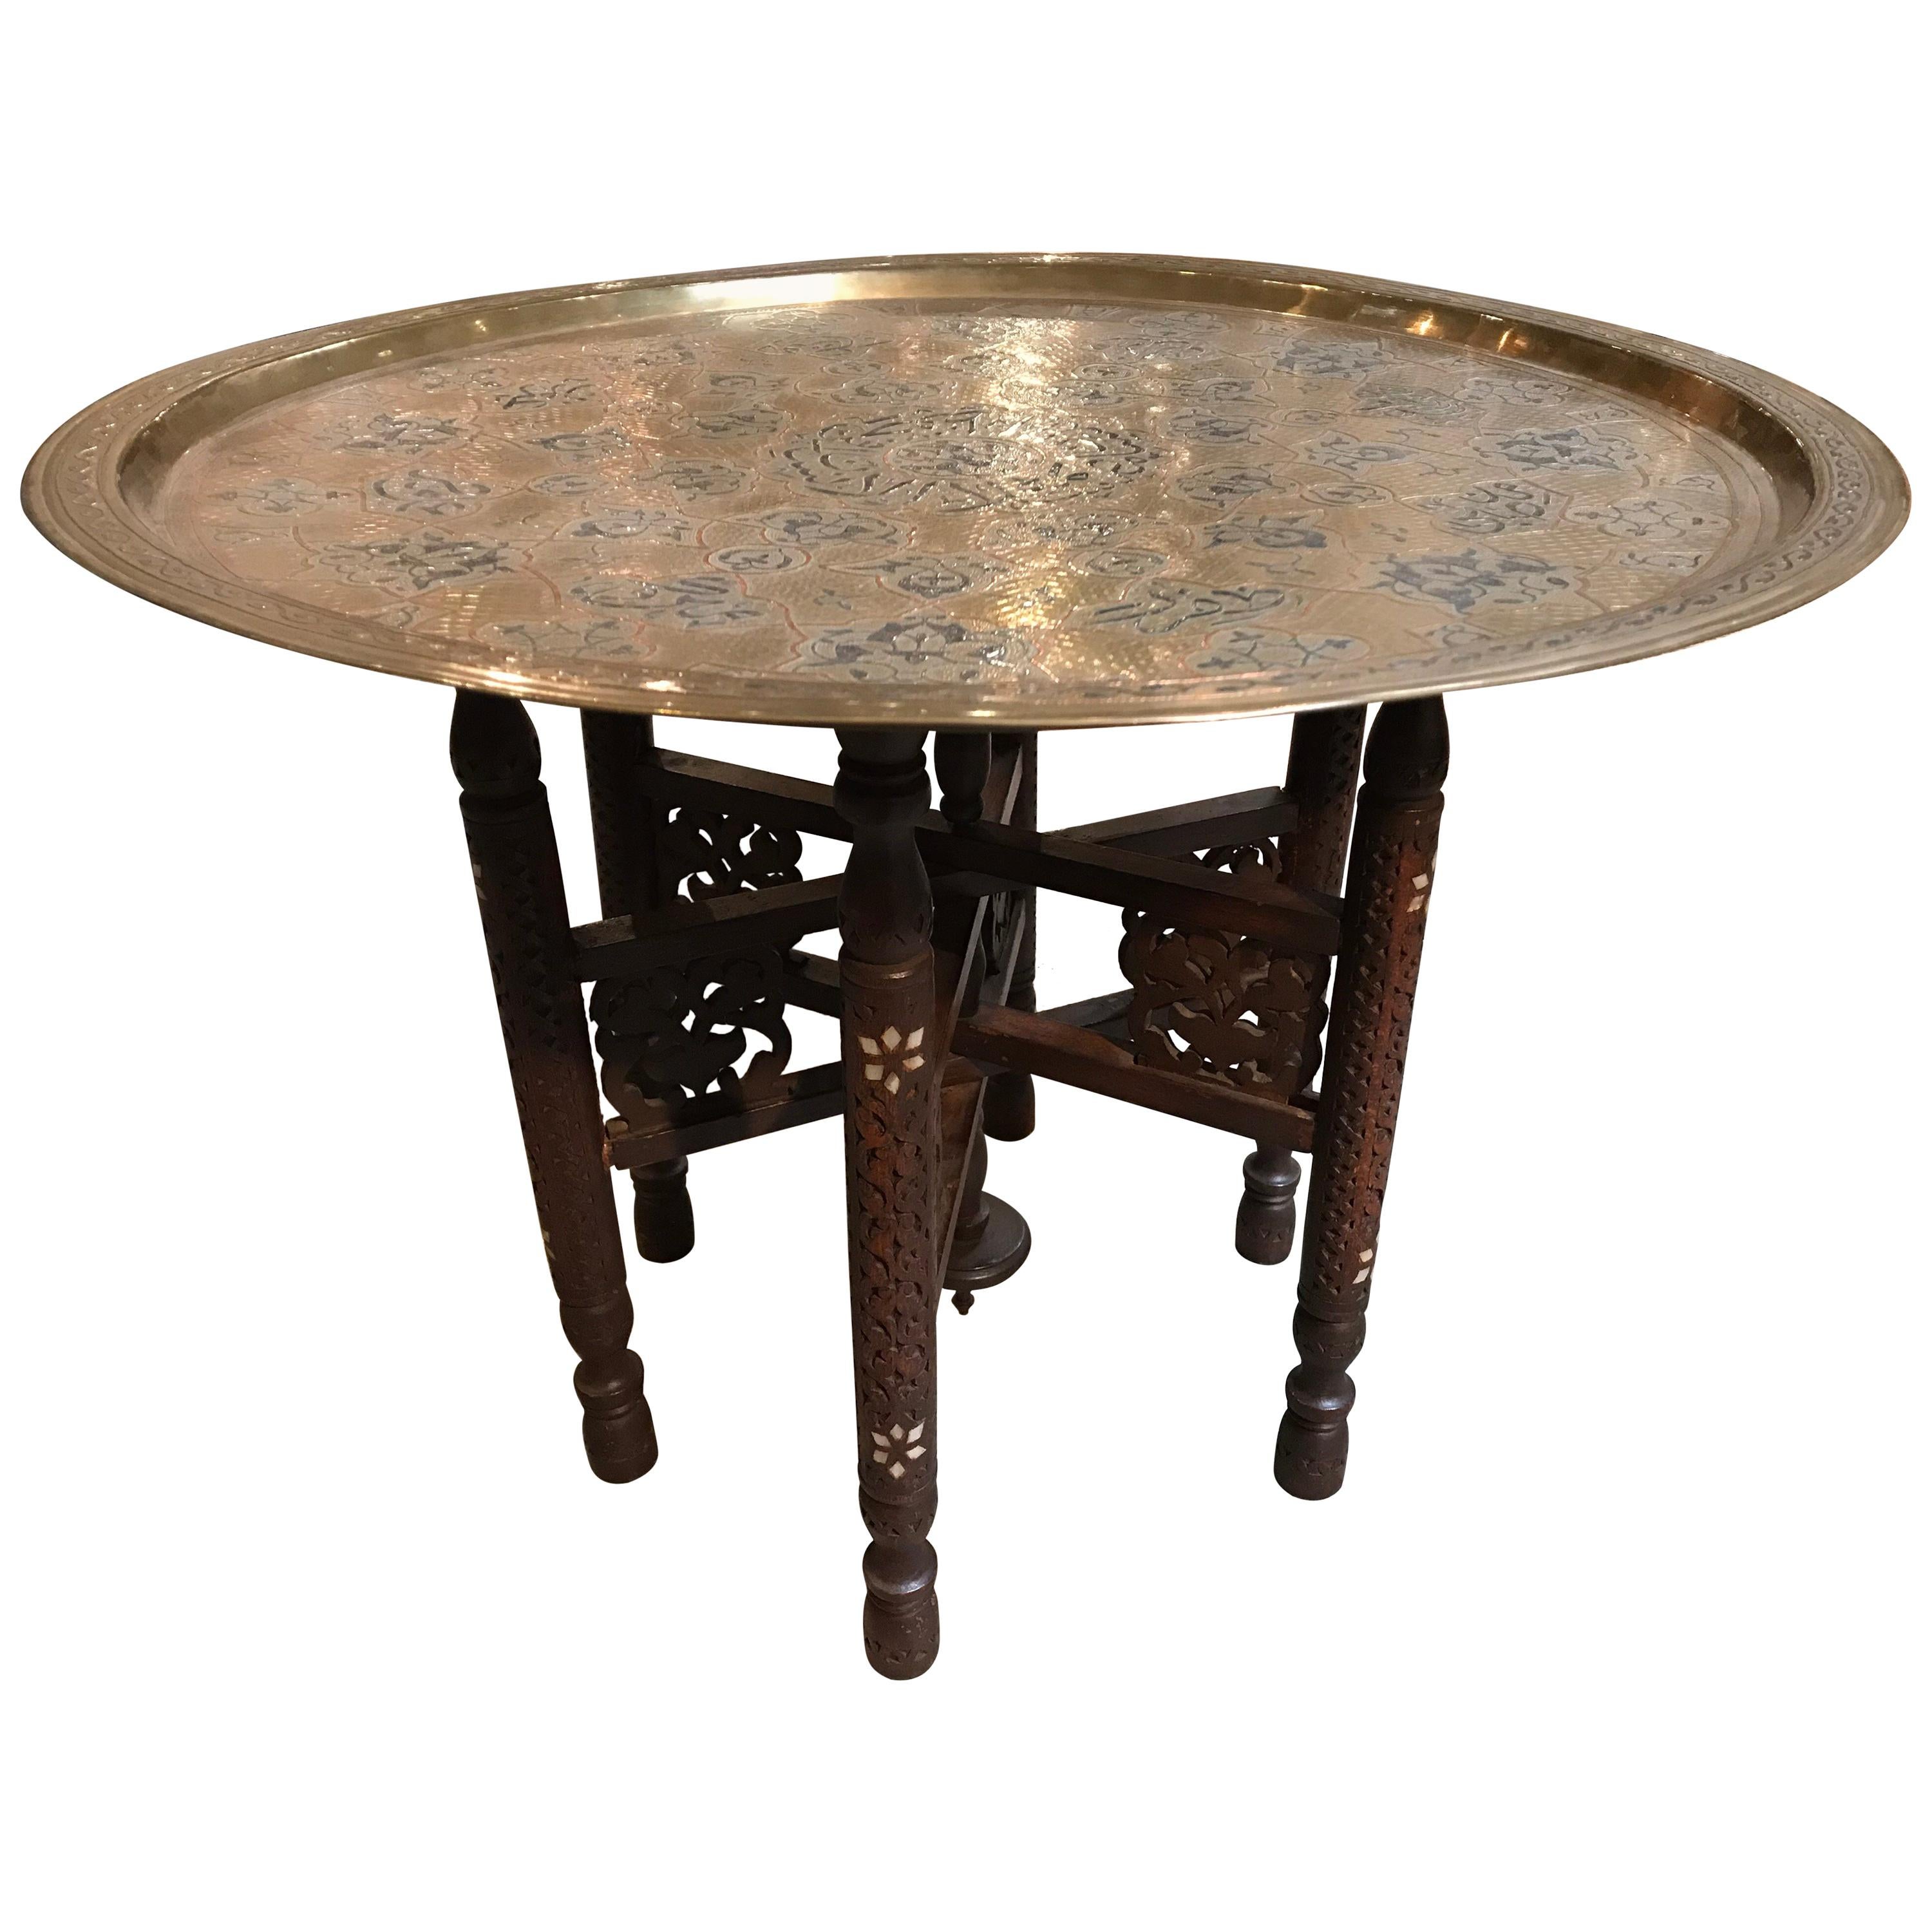 Anglo-Indian Folding Table with Metal Tray